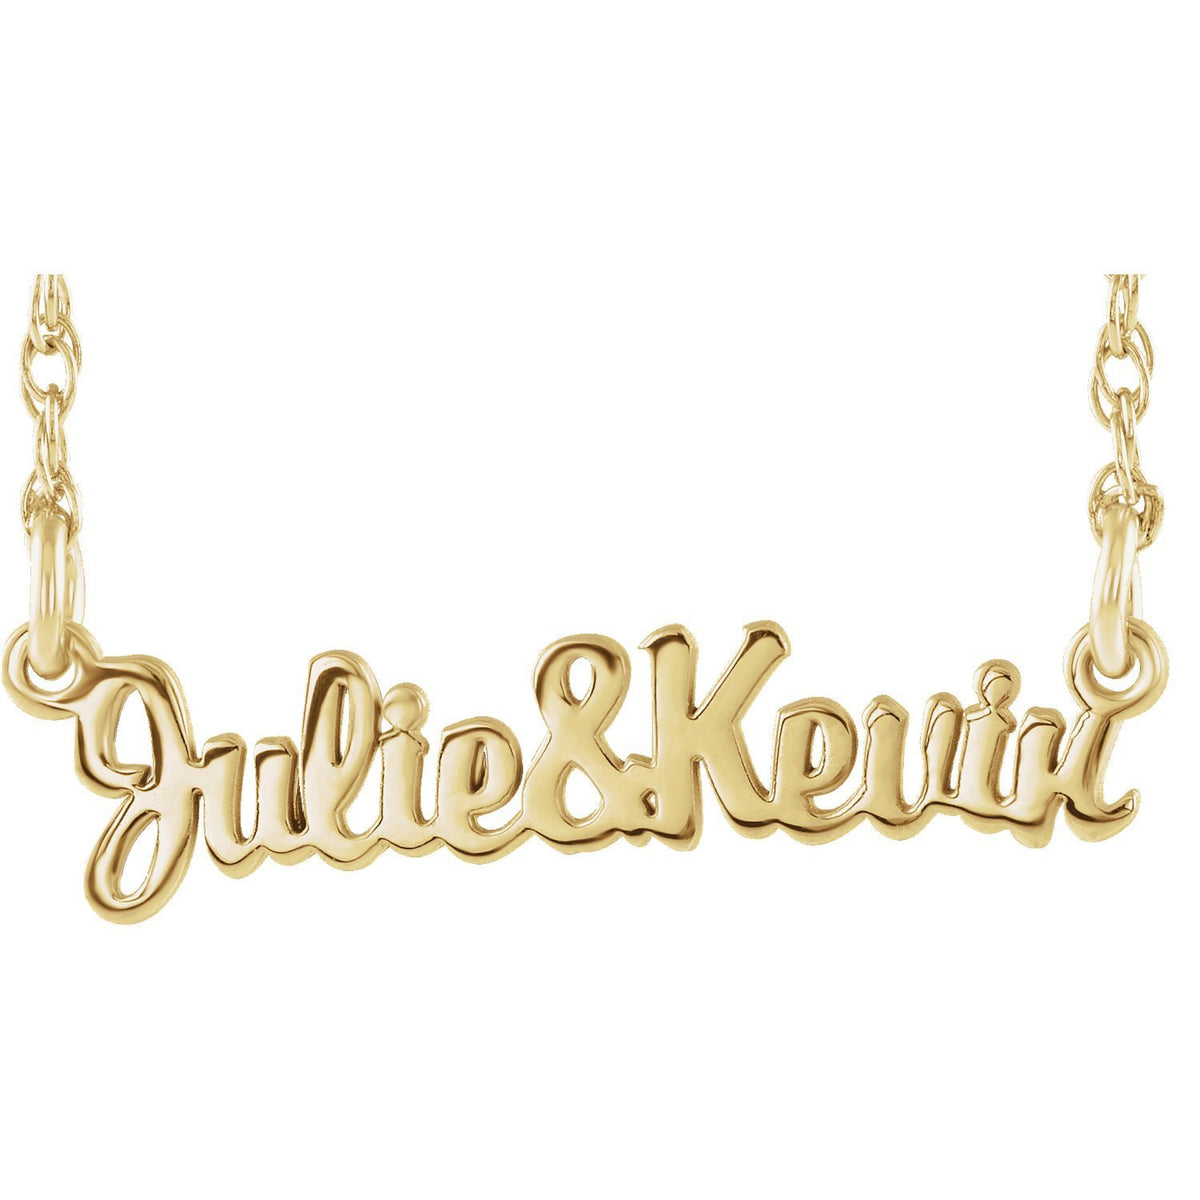 14KT GOLD SCRIPT COUPLES NAMEPLATE NECKLACE 16 Inches / 14KT Gold / Rose,16 Inches / 14KT Gold / White,16 Inches / 14KT Gold / Yellow,16 Inches / Sterling Silver / Rose,16 Inches / Sterling Silver / White,16 Inches / Sterling Silver / Yellow,18 Inches / 14KT Gold / Rose,18 Inches / 14KT Gold / White,18 Inches / 14KT Gold / Yellow,18 Inches / Sterling Silver / Rose,18 Inches / Sterling Silver / White,18 Inches / Sterling Silver / Yellow